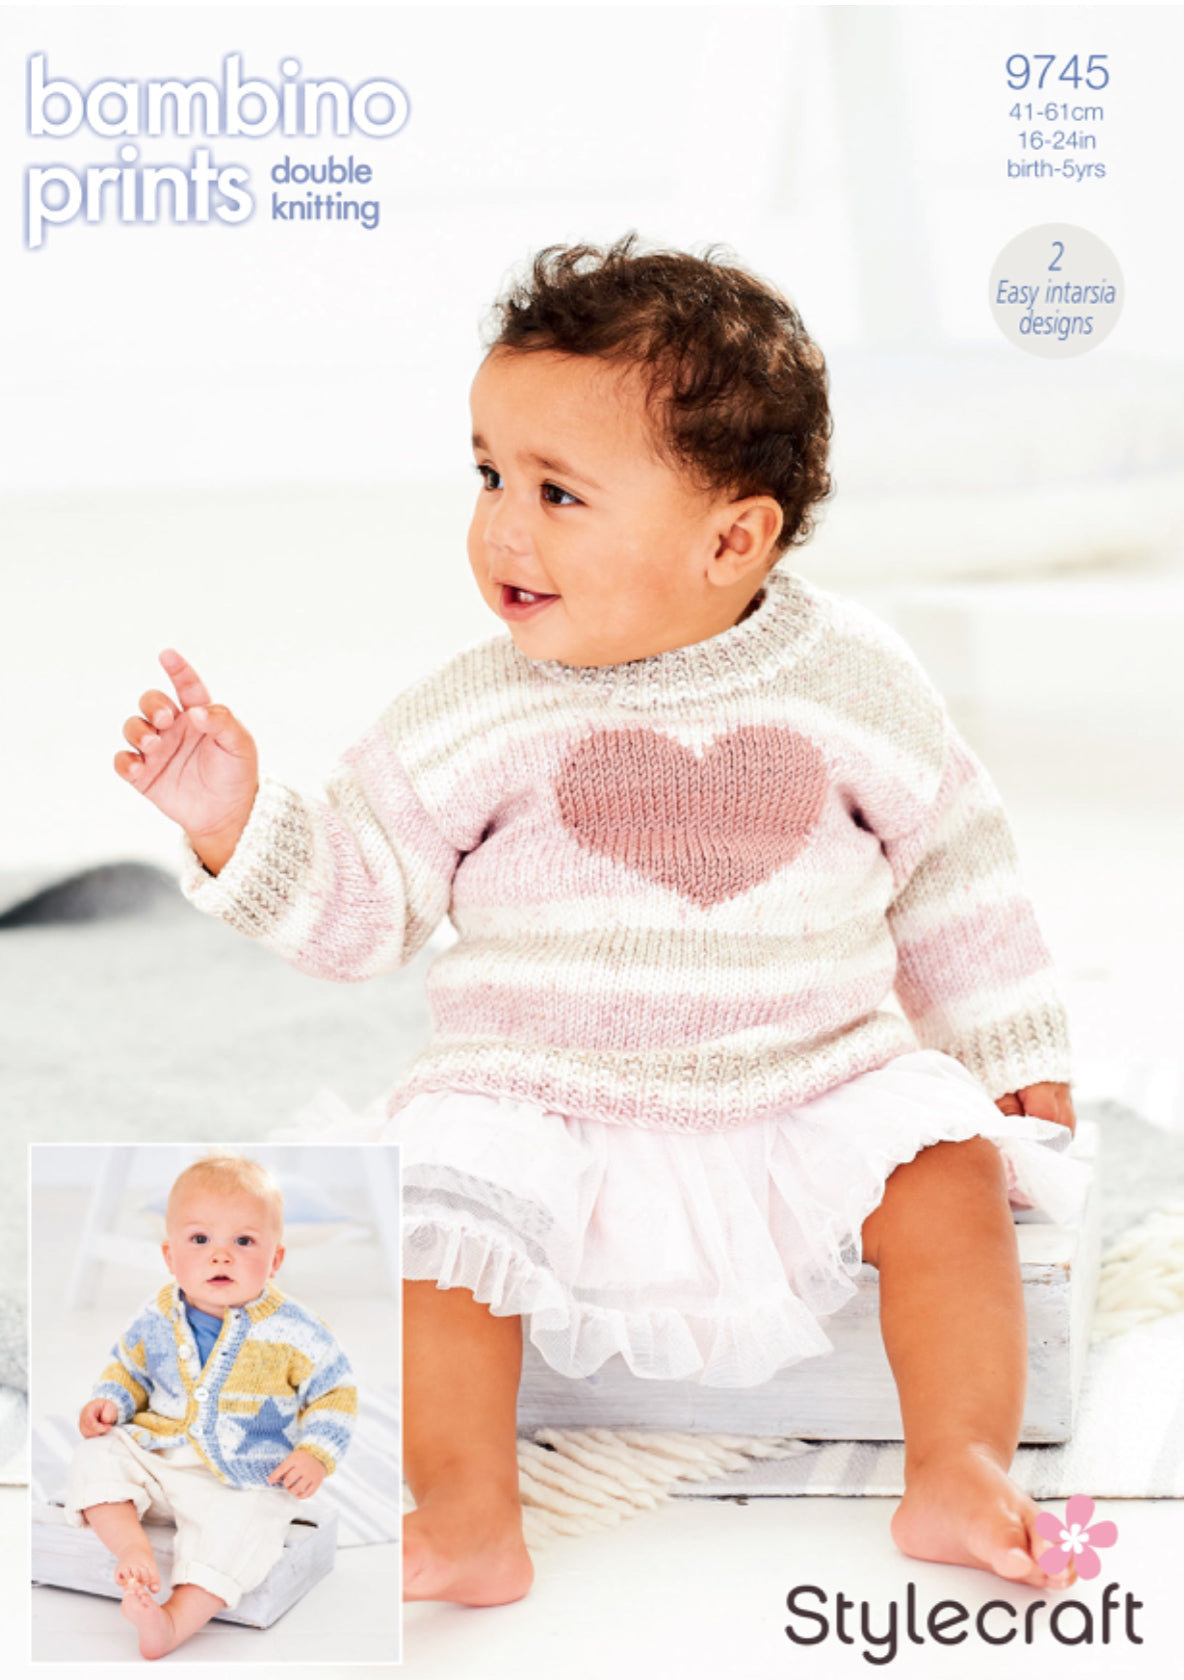 Stylecraft 9745 Jumper and Cardigan in Bambino Prints DK and Bambino DK